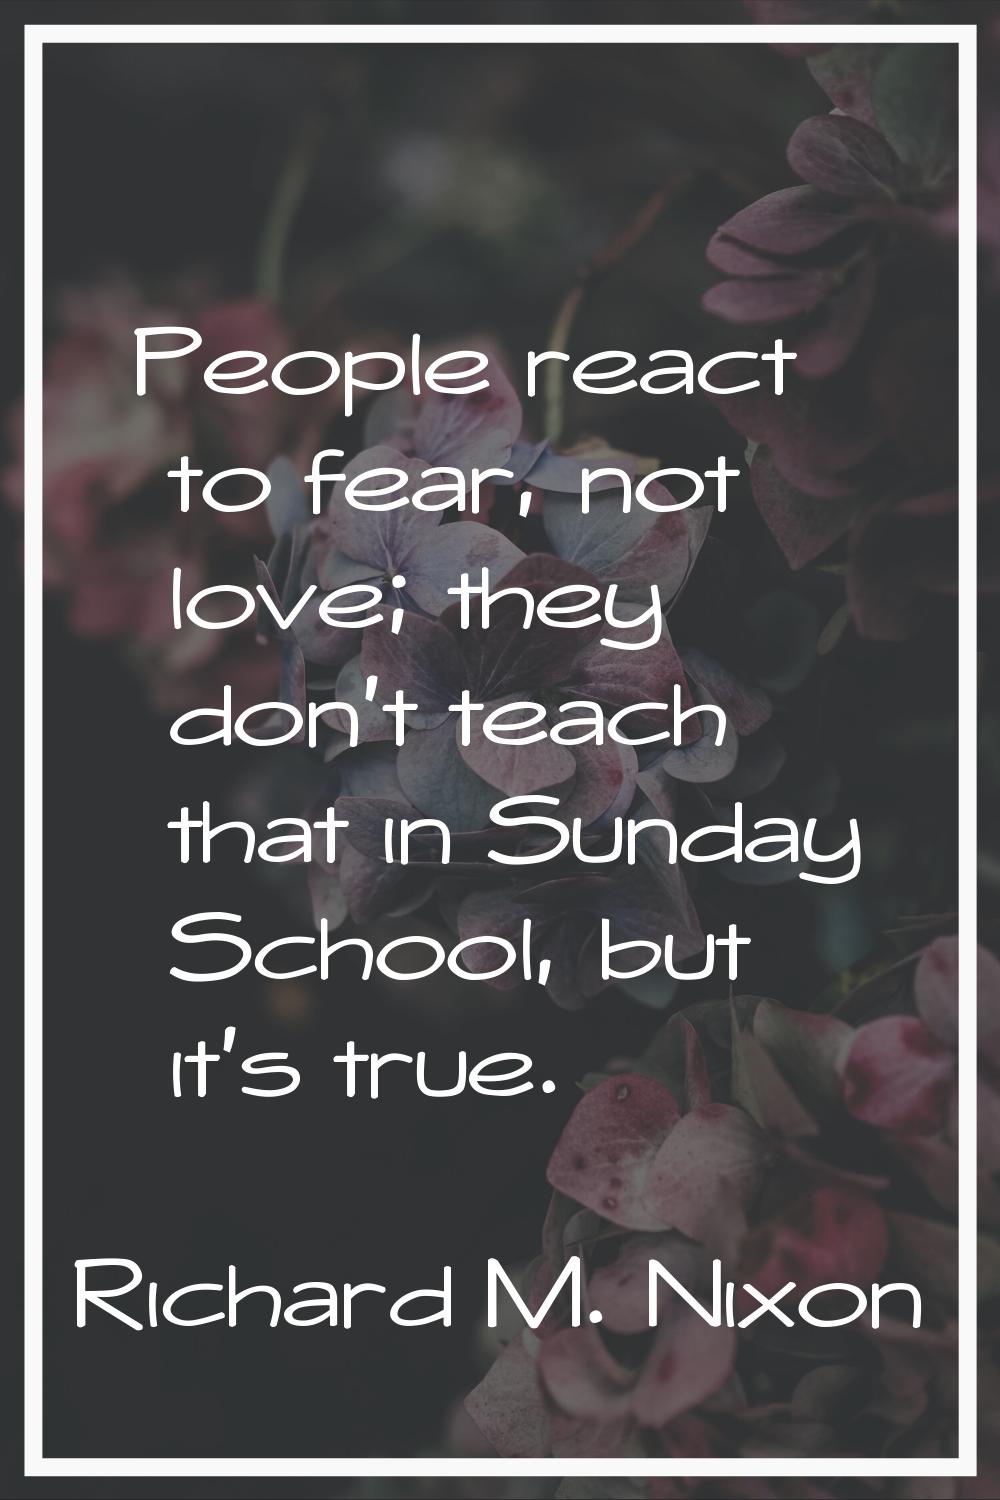 People react to fear, not love; they don't teach that in Sunday School, but it's true.